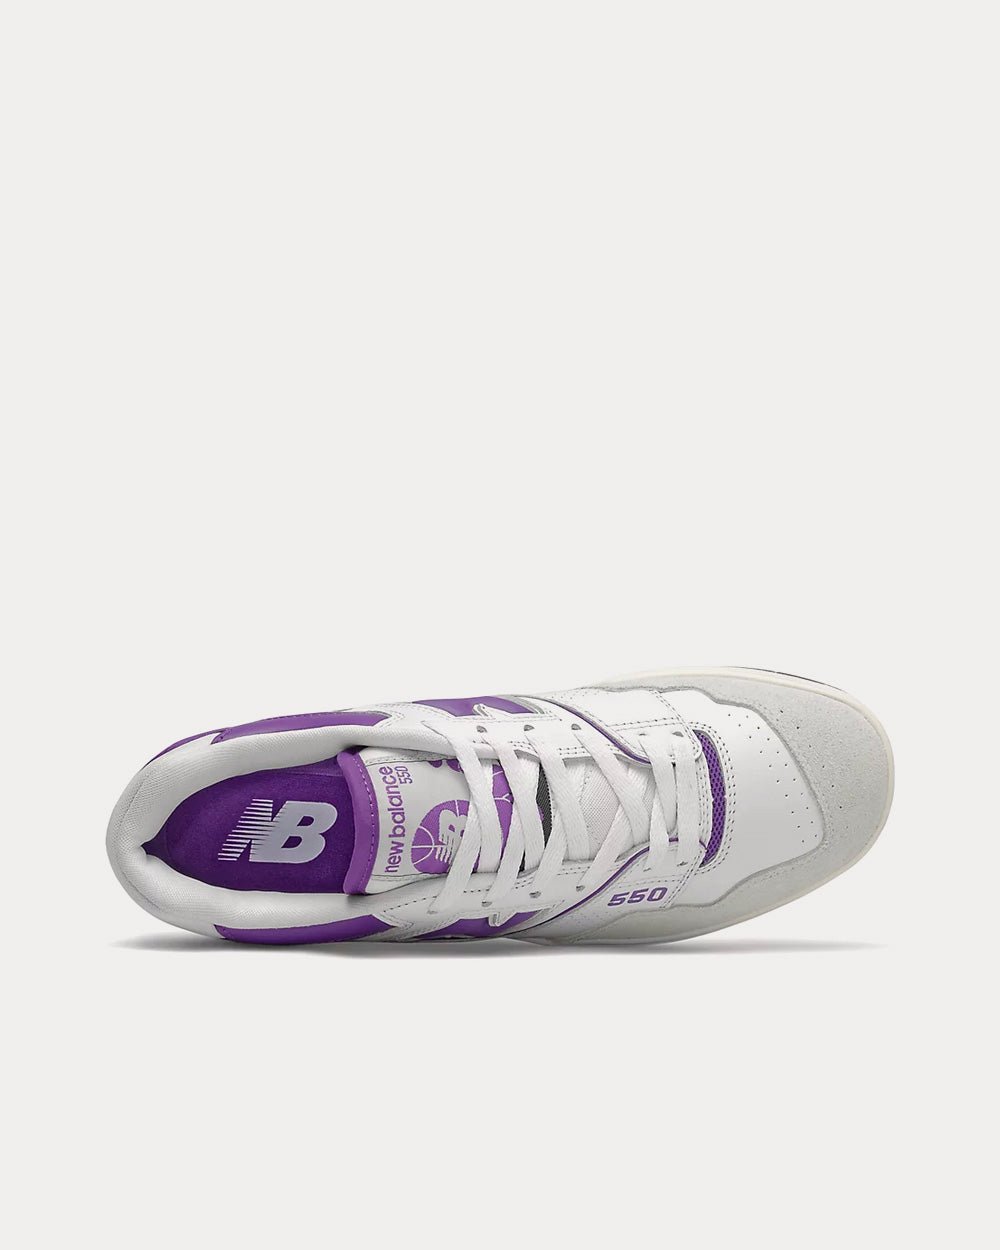 New Balance - 550 White with Prism Purple Low Top Sneakers